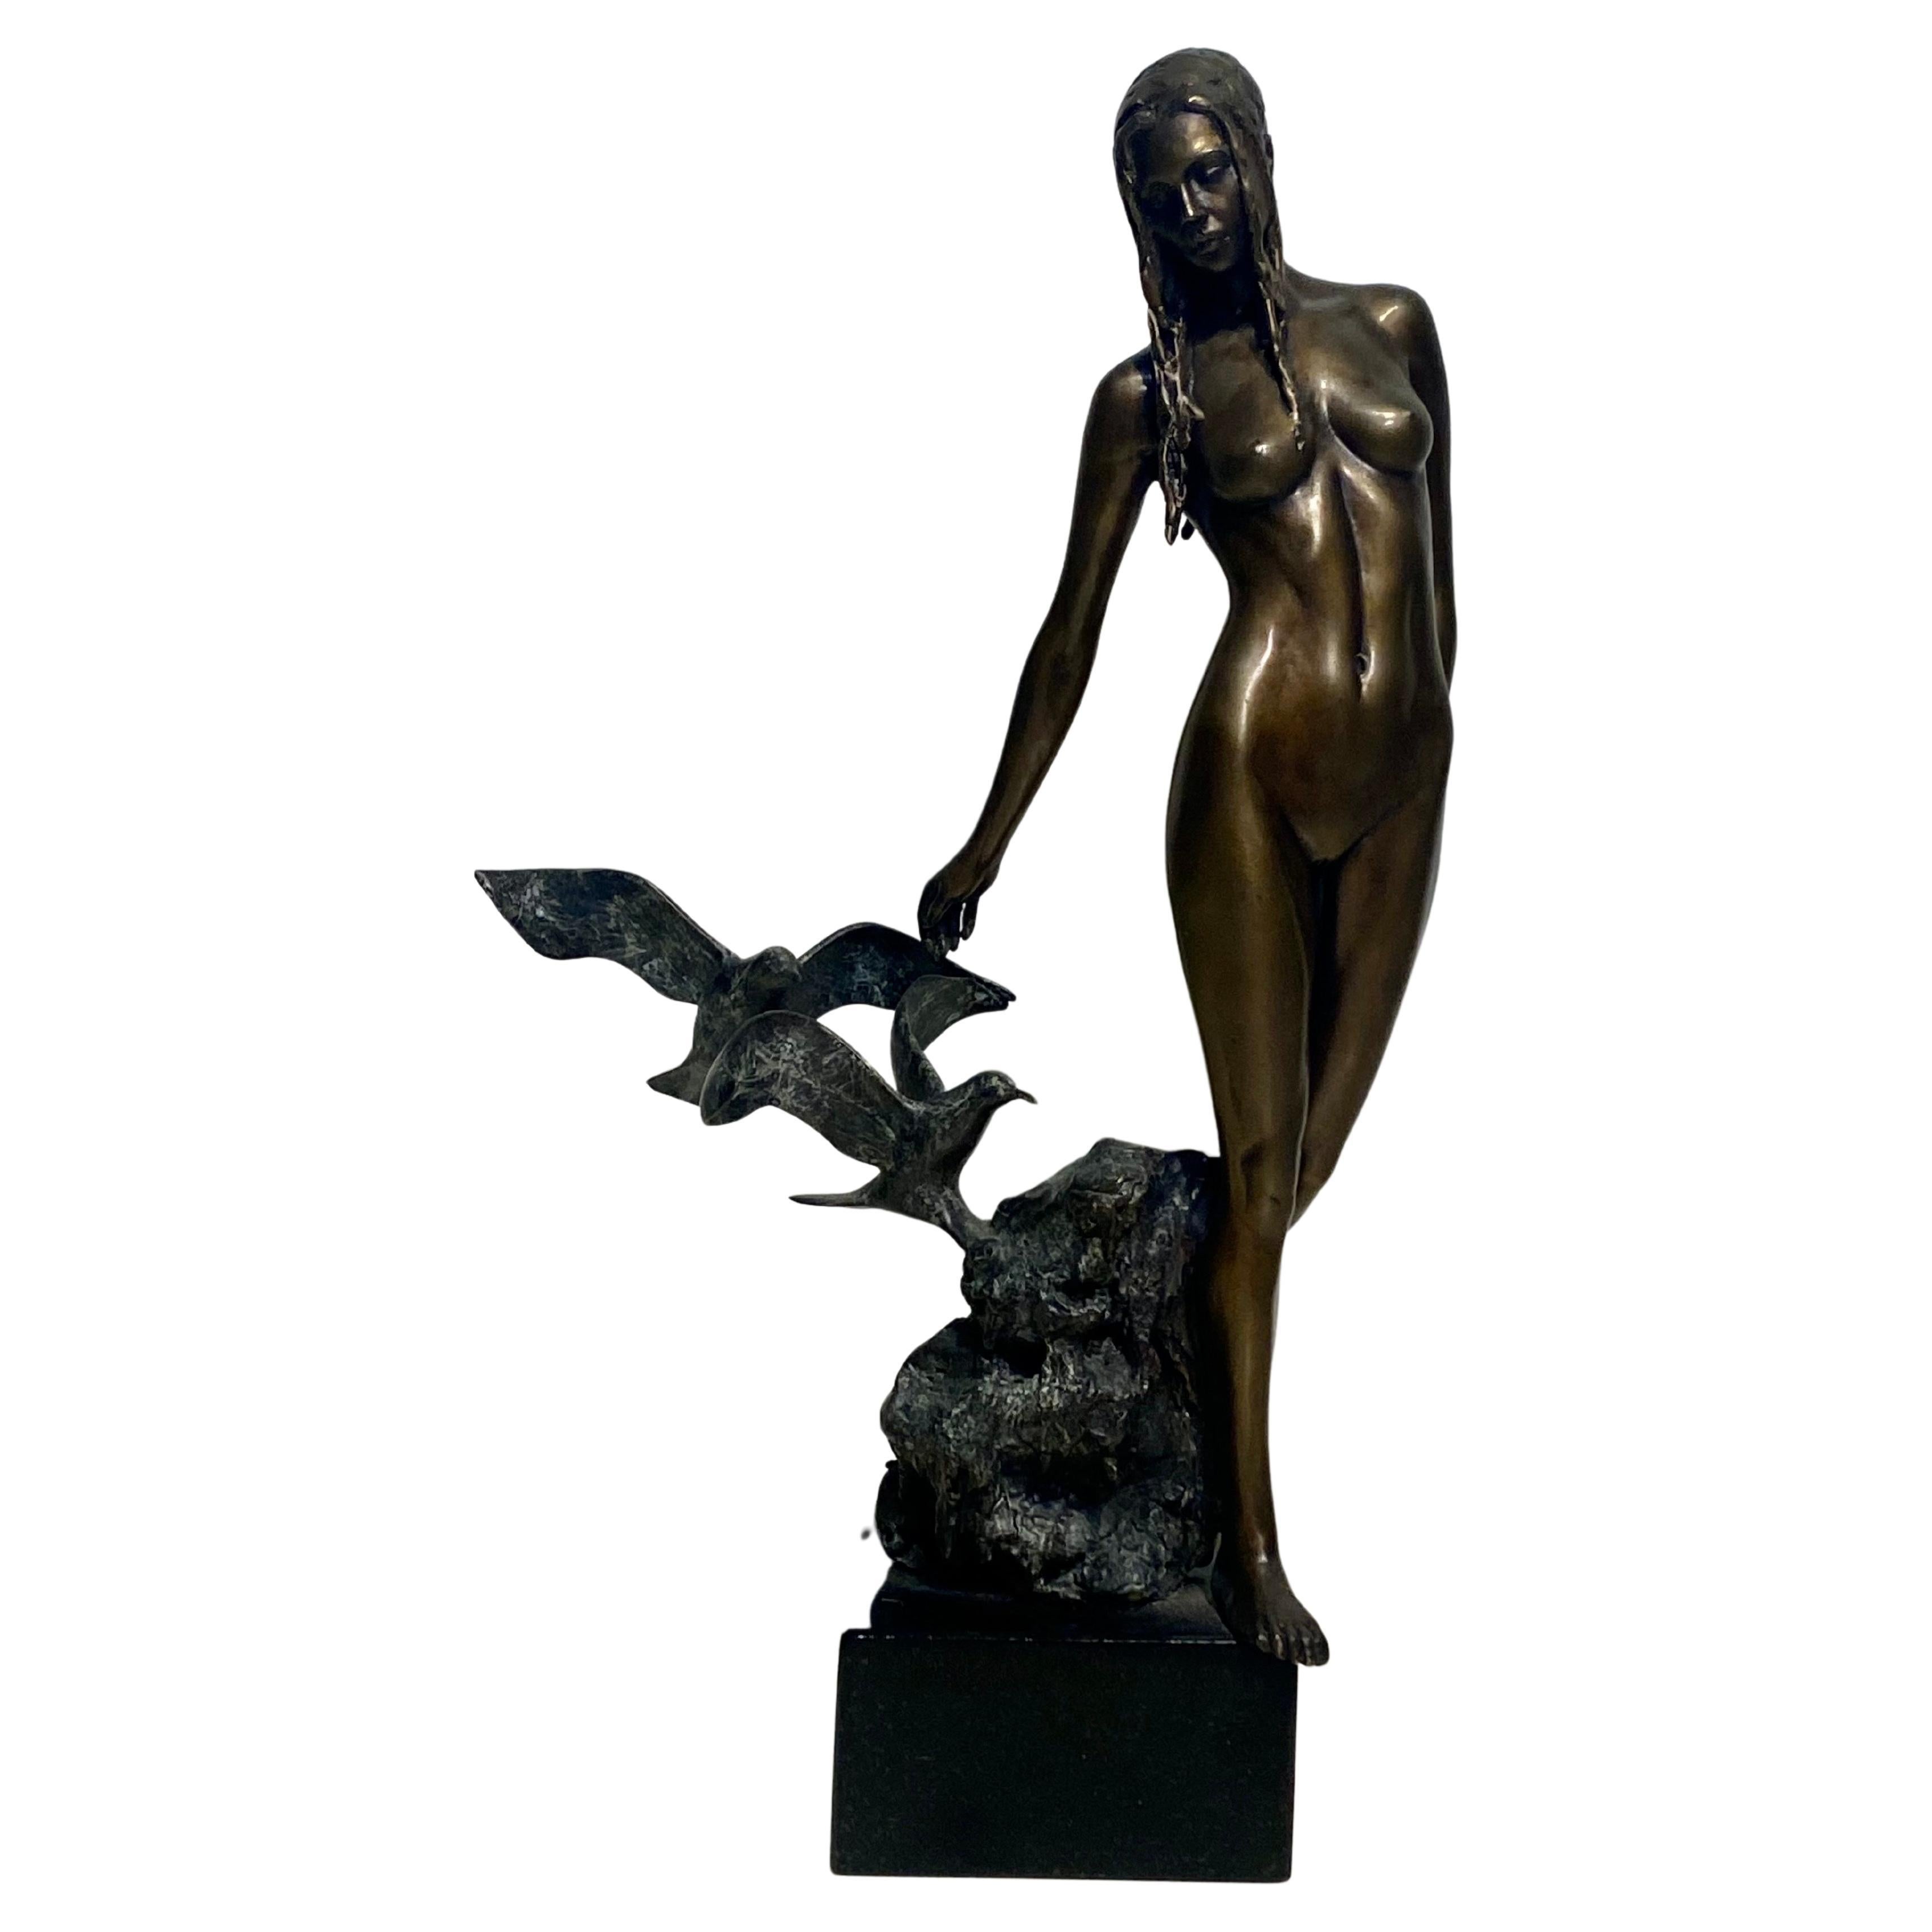 Neil Welch. "Galatia" A Limited Edition of 9 Bronze Sculpture 7/9 For Sale